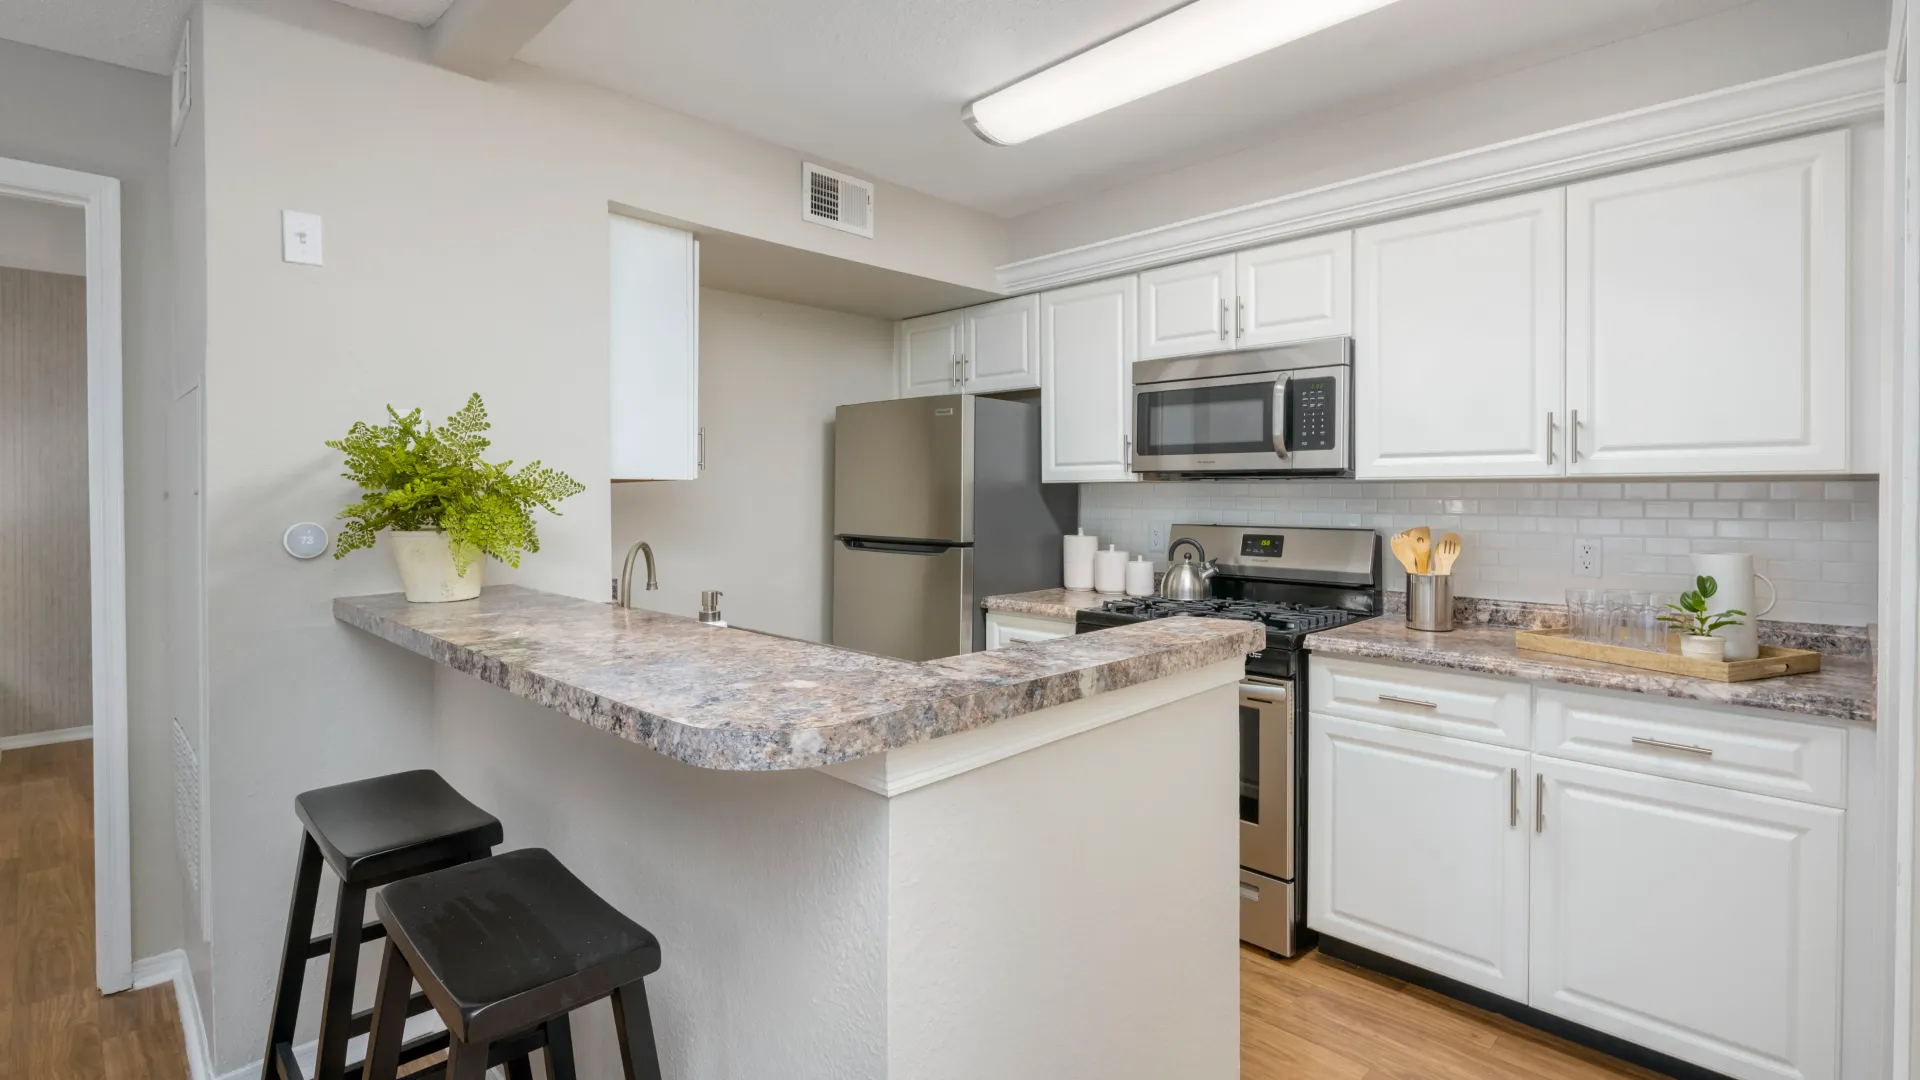 A well-lit kitchen with white cabinetry, gleaming subway tile backsplash, and stylish granite-style countertops.